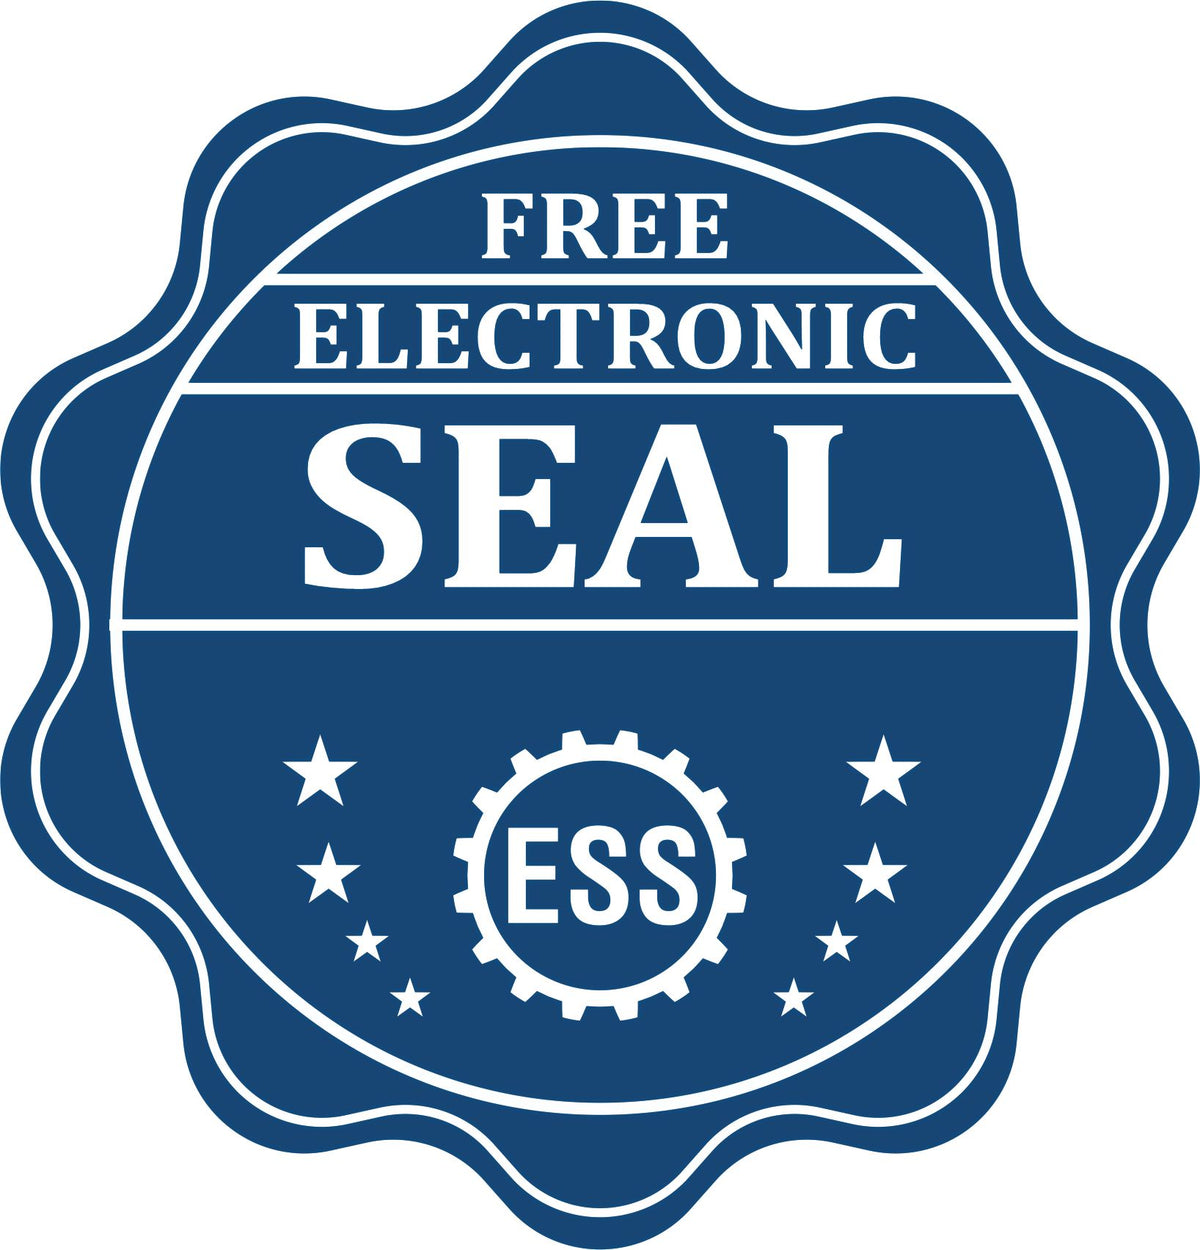 A badge showing a free electronic seal for the Self-Inking North Carolina Landscape Architect Stamp with stars and the ESS gear on the emblem.